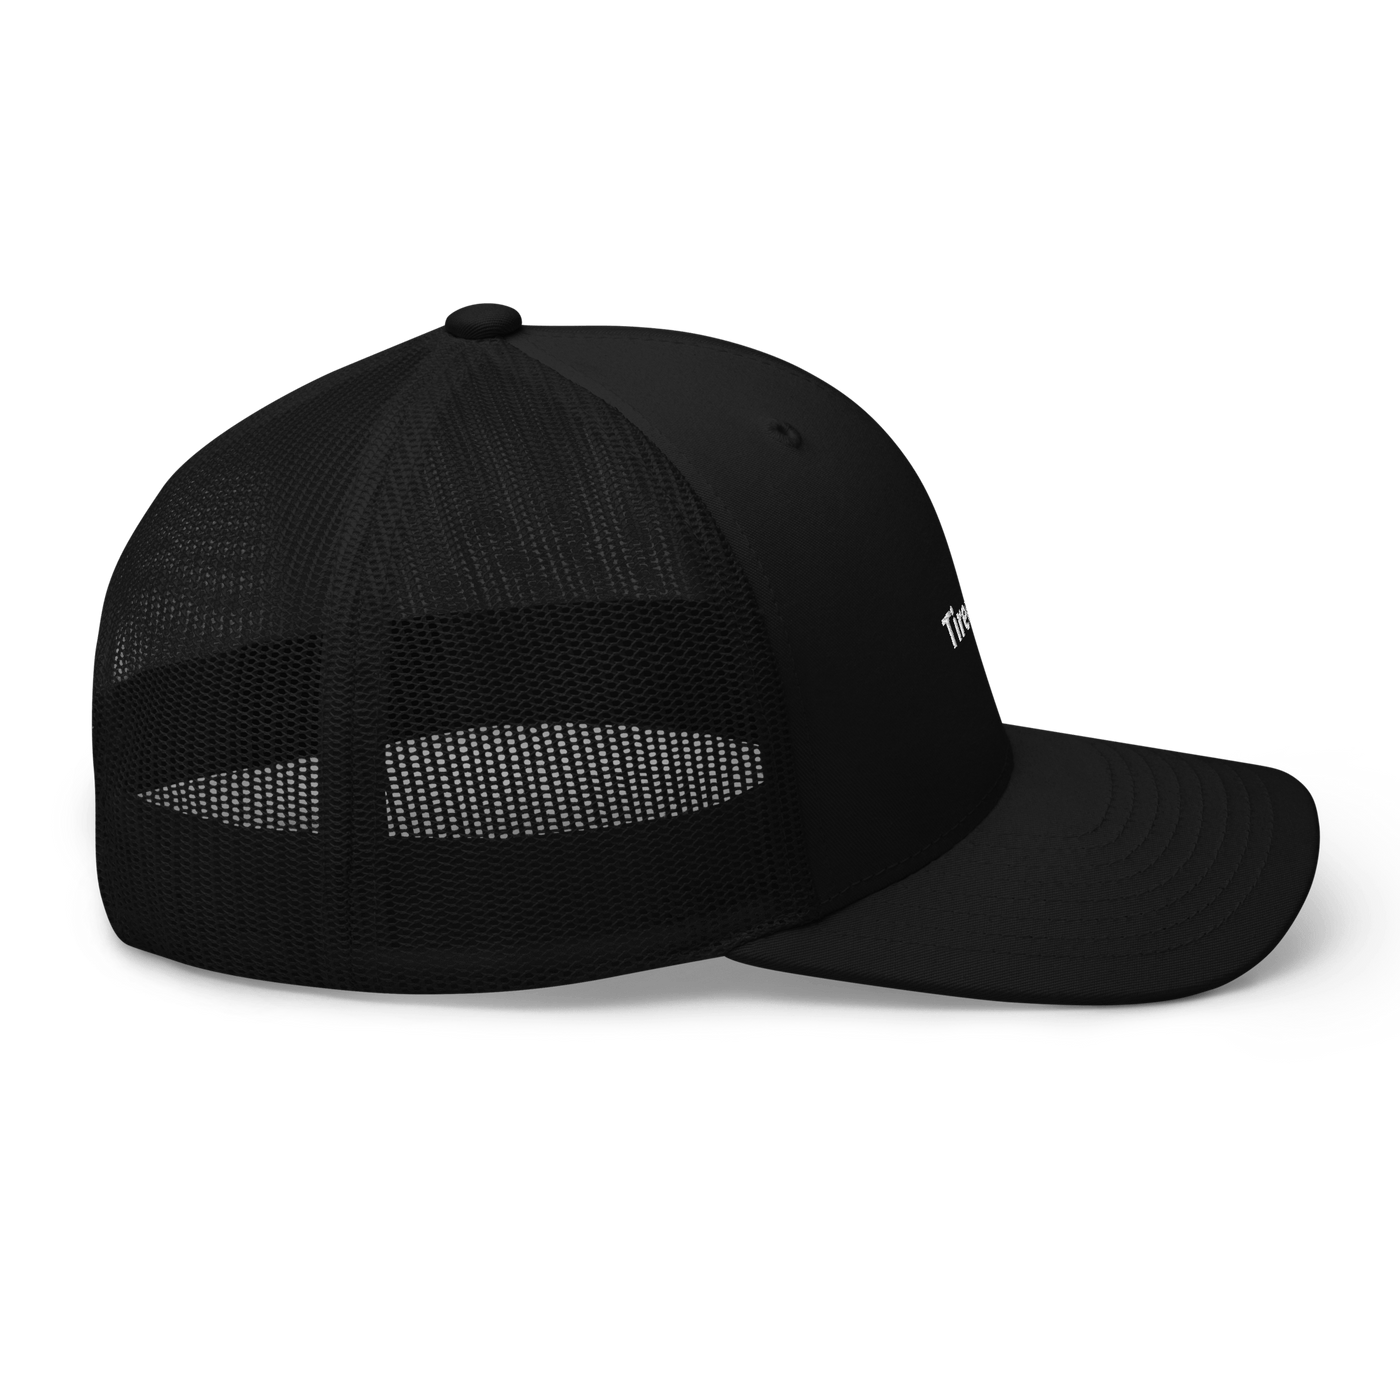 Tired dad Trucker Cap - Black - - Just Another Cap Store